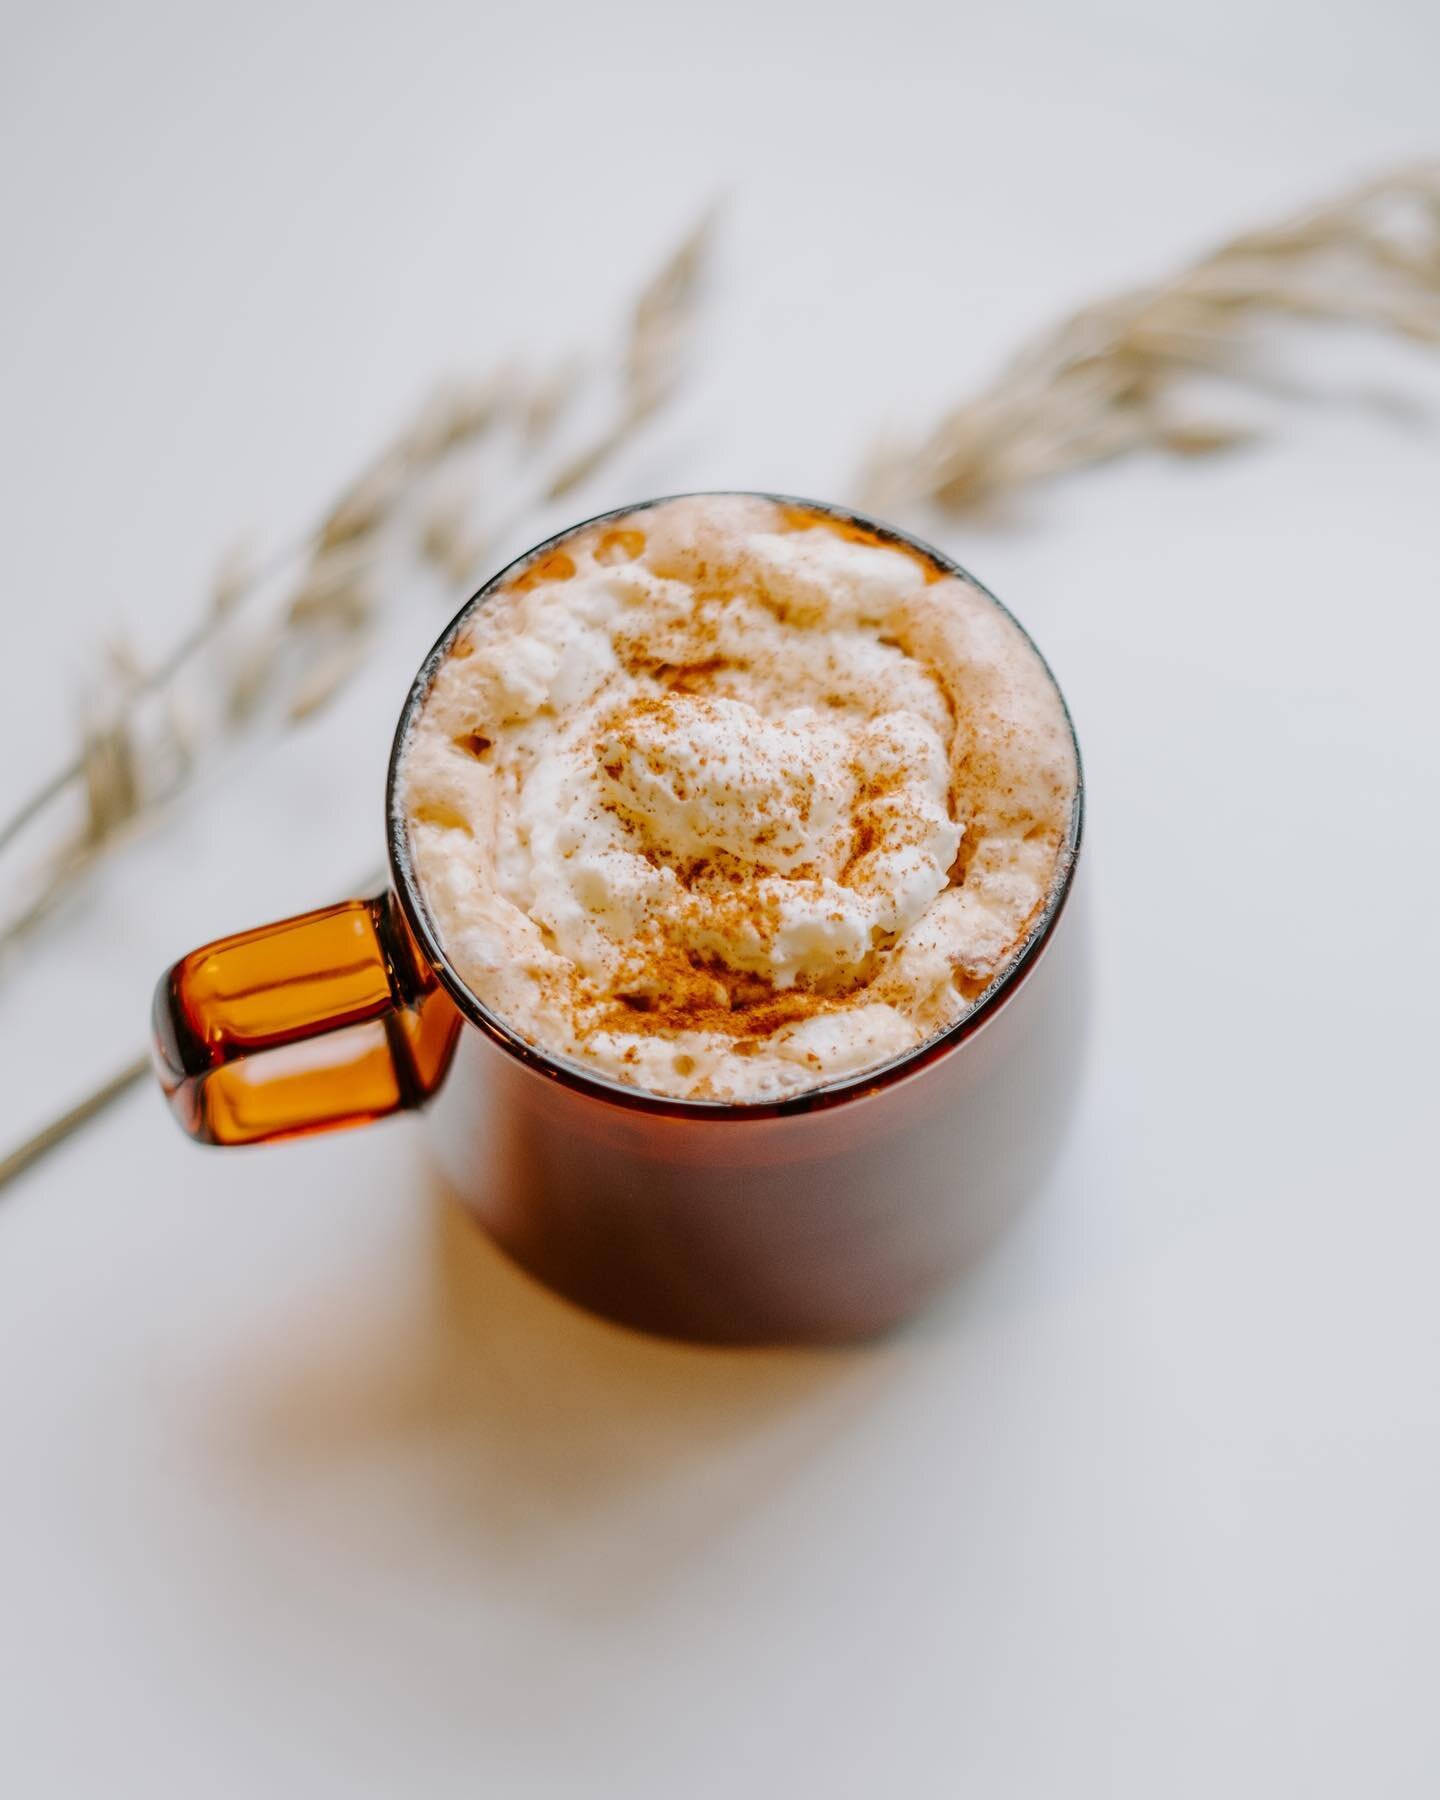 Our monthly coffee special is here and it's a real treat! Introducing our Carrot Cake Latte - made with a delightful homemade syrup that blends carrot juice, apple juice, house chai, brown sugar, cinnamon, nutmeg, and clove, poured over our single or